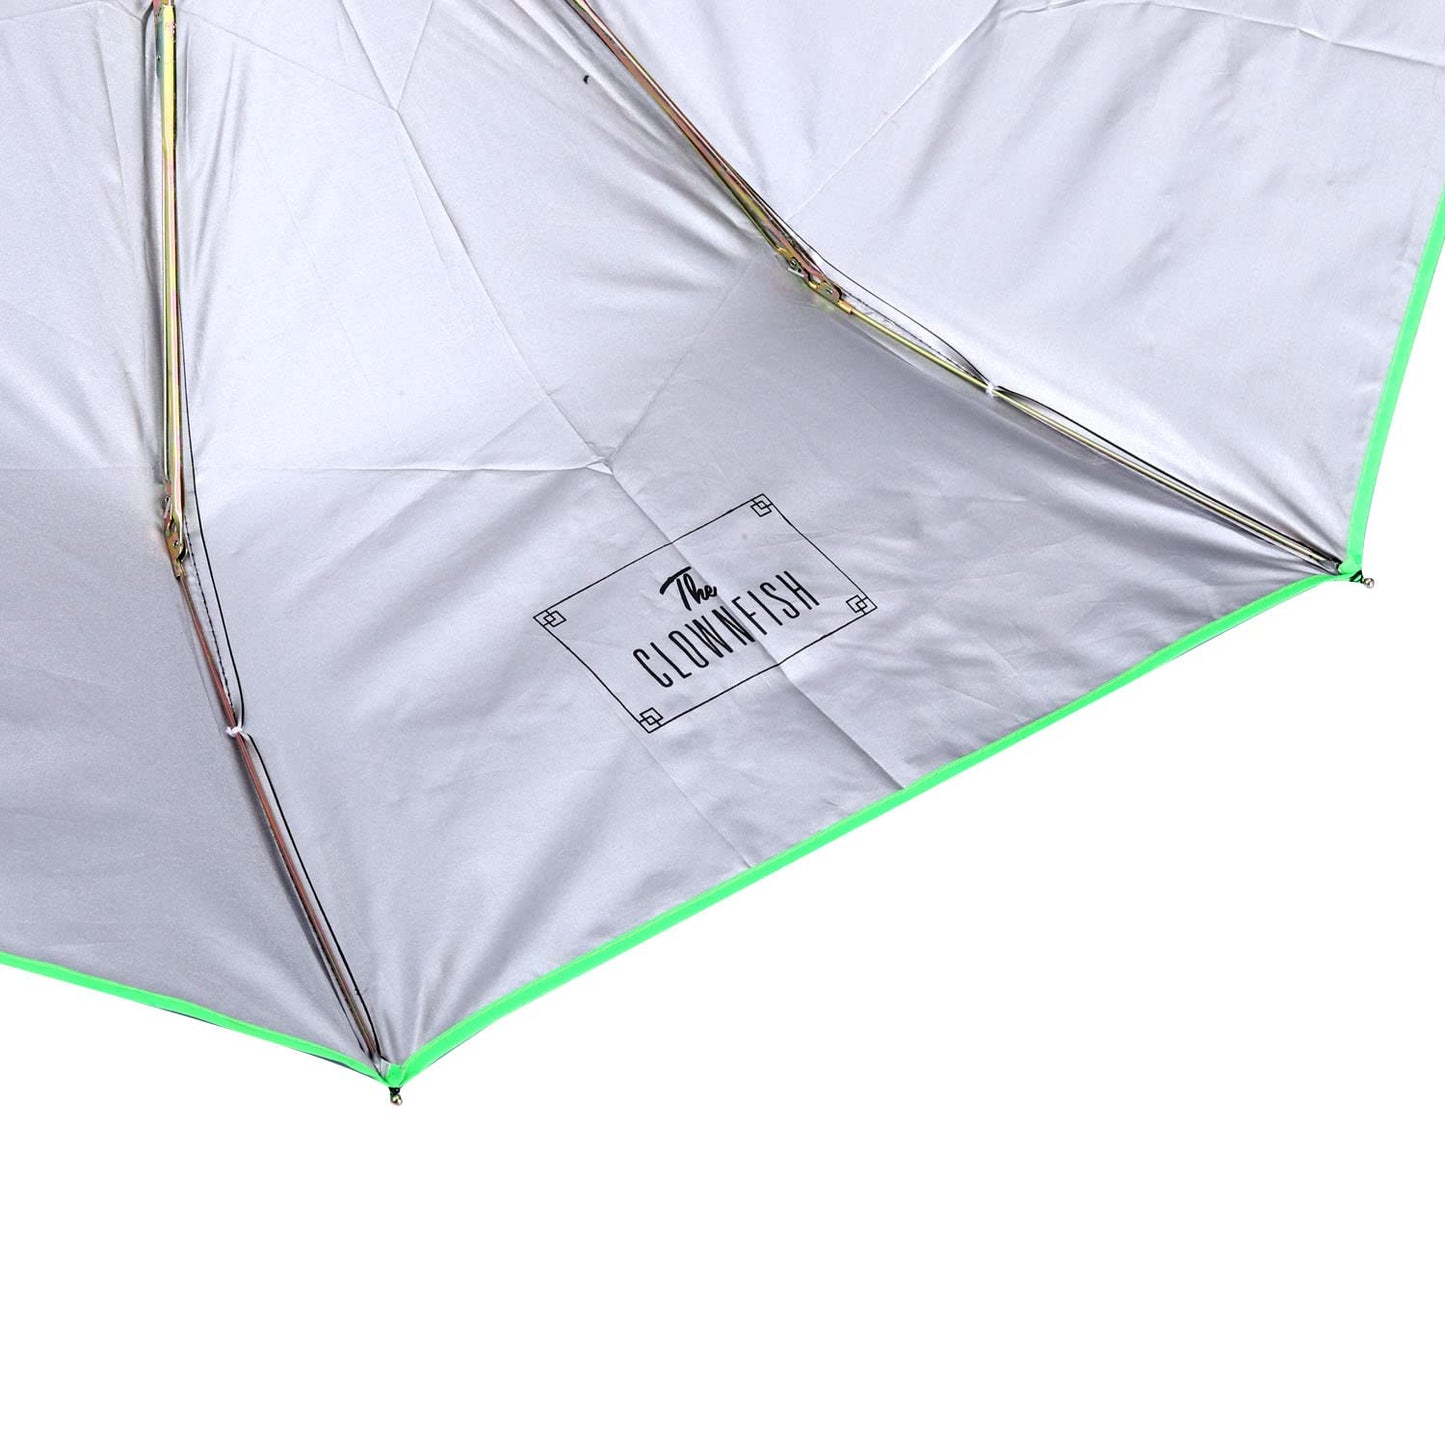 THE CLOWNFISH Umbrella Coloured Piping Series 3 Fold Auto Open Waterproof 190 T Polyester Double Coated Silver Lined Umbrellas For Men and Women (Coloured Piping-Parrot Green)